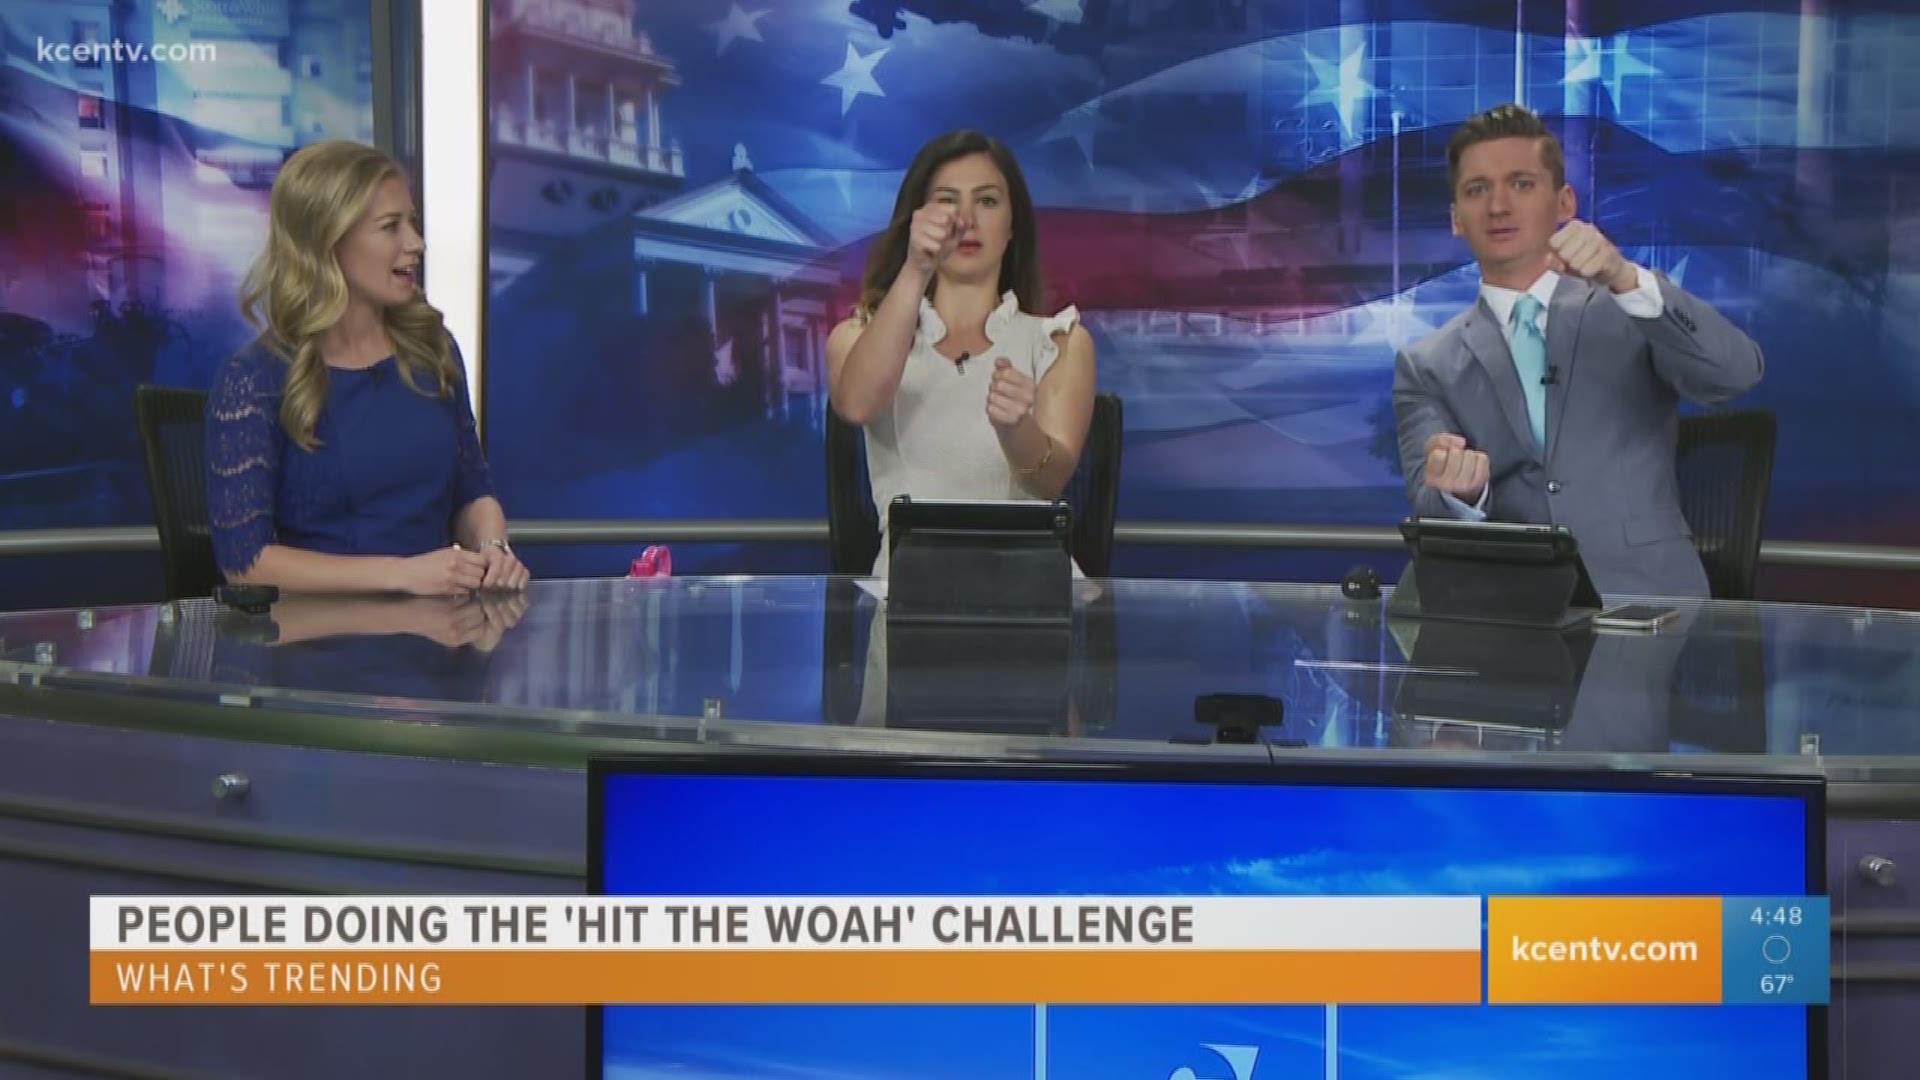 We try to "hit The Woah" on Texas Today. Plus, Kim Kardashian announced she is working to become a lawyer, and the official trailer for 'The Lion King' has been released.